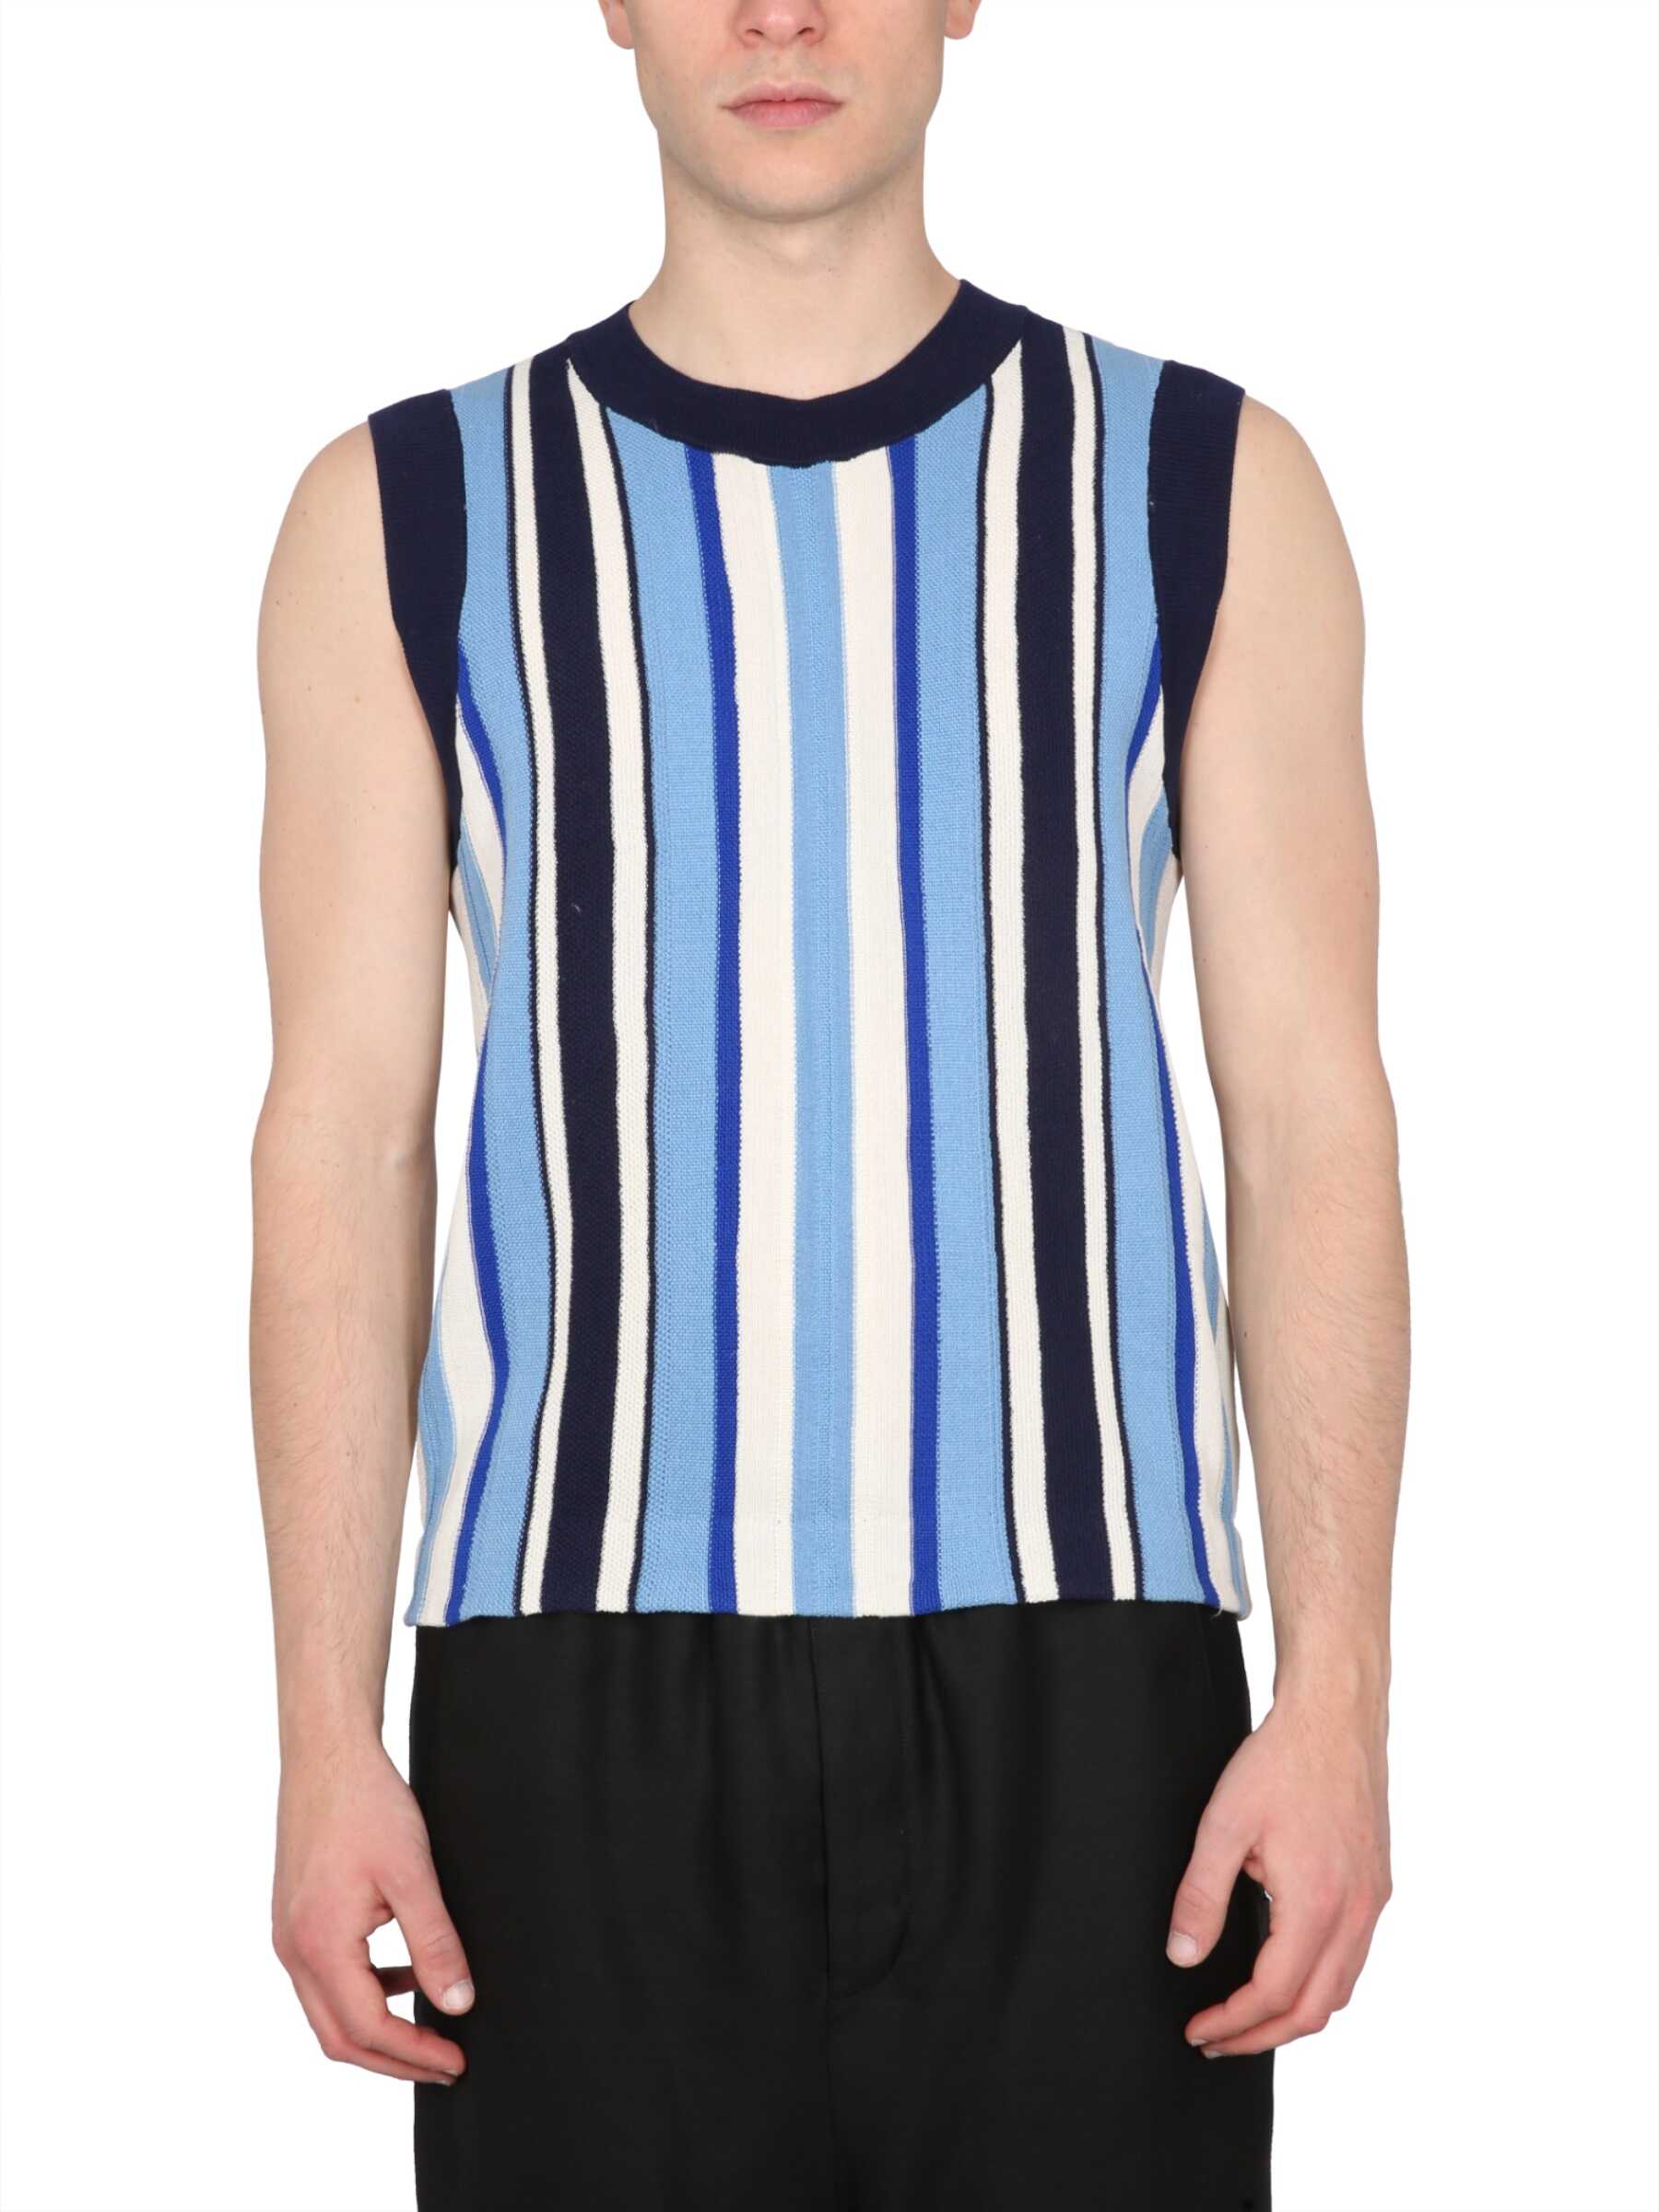 WALES BONNER Vest With Stripe Pattern MULTICOLOUR b-mall.ro